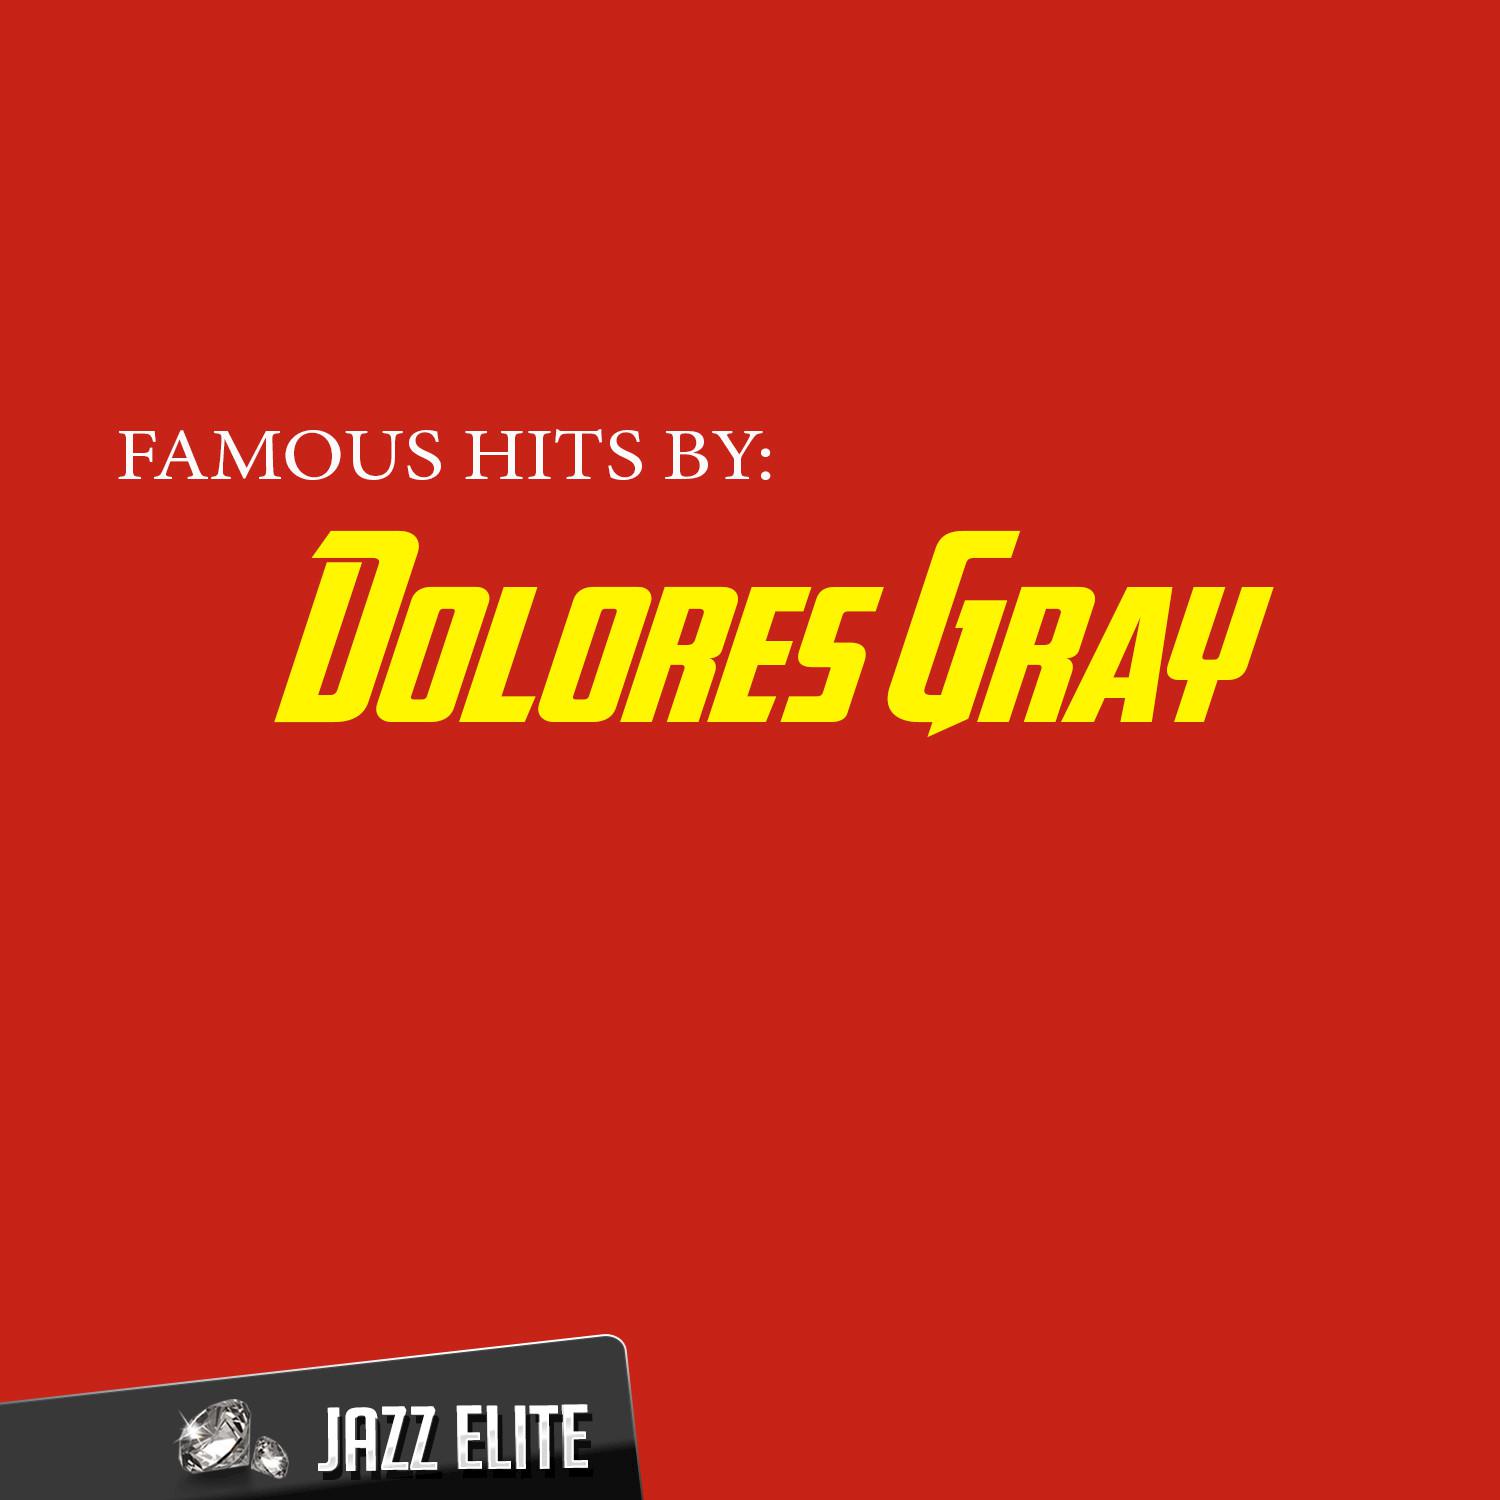 Famous Hits by Dolores Gray